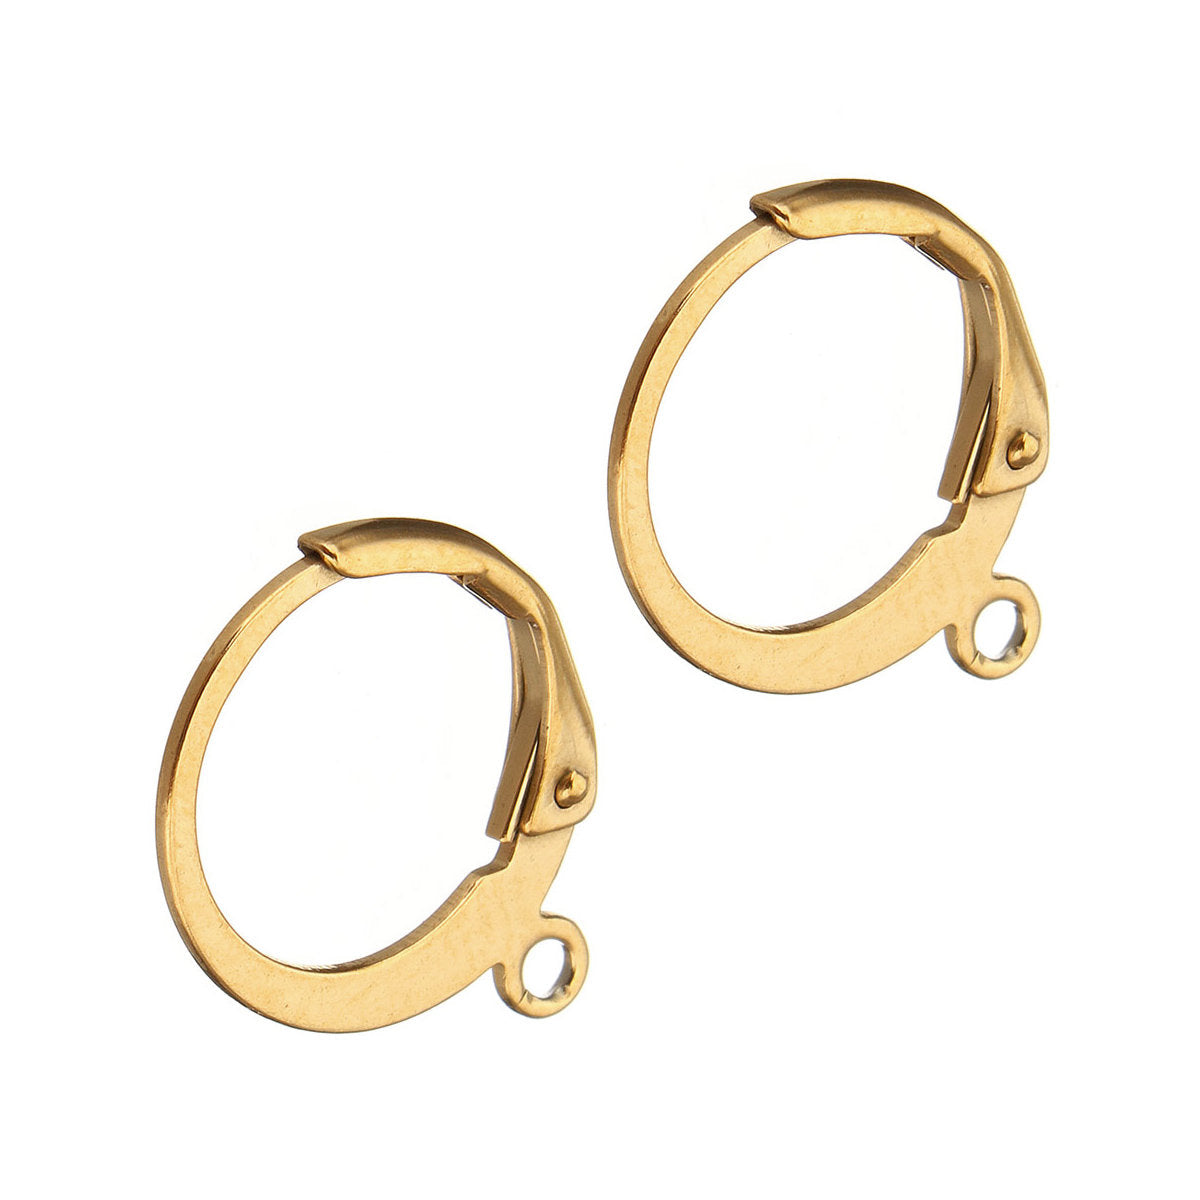 4 Pairs X Gold Plated Stainless Steel Leverback Earring Blanks, Gold Lever  Back Earring Hooks, Gold Earring Wire 1422 